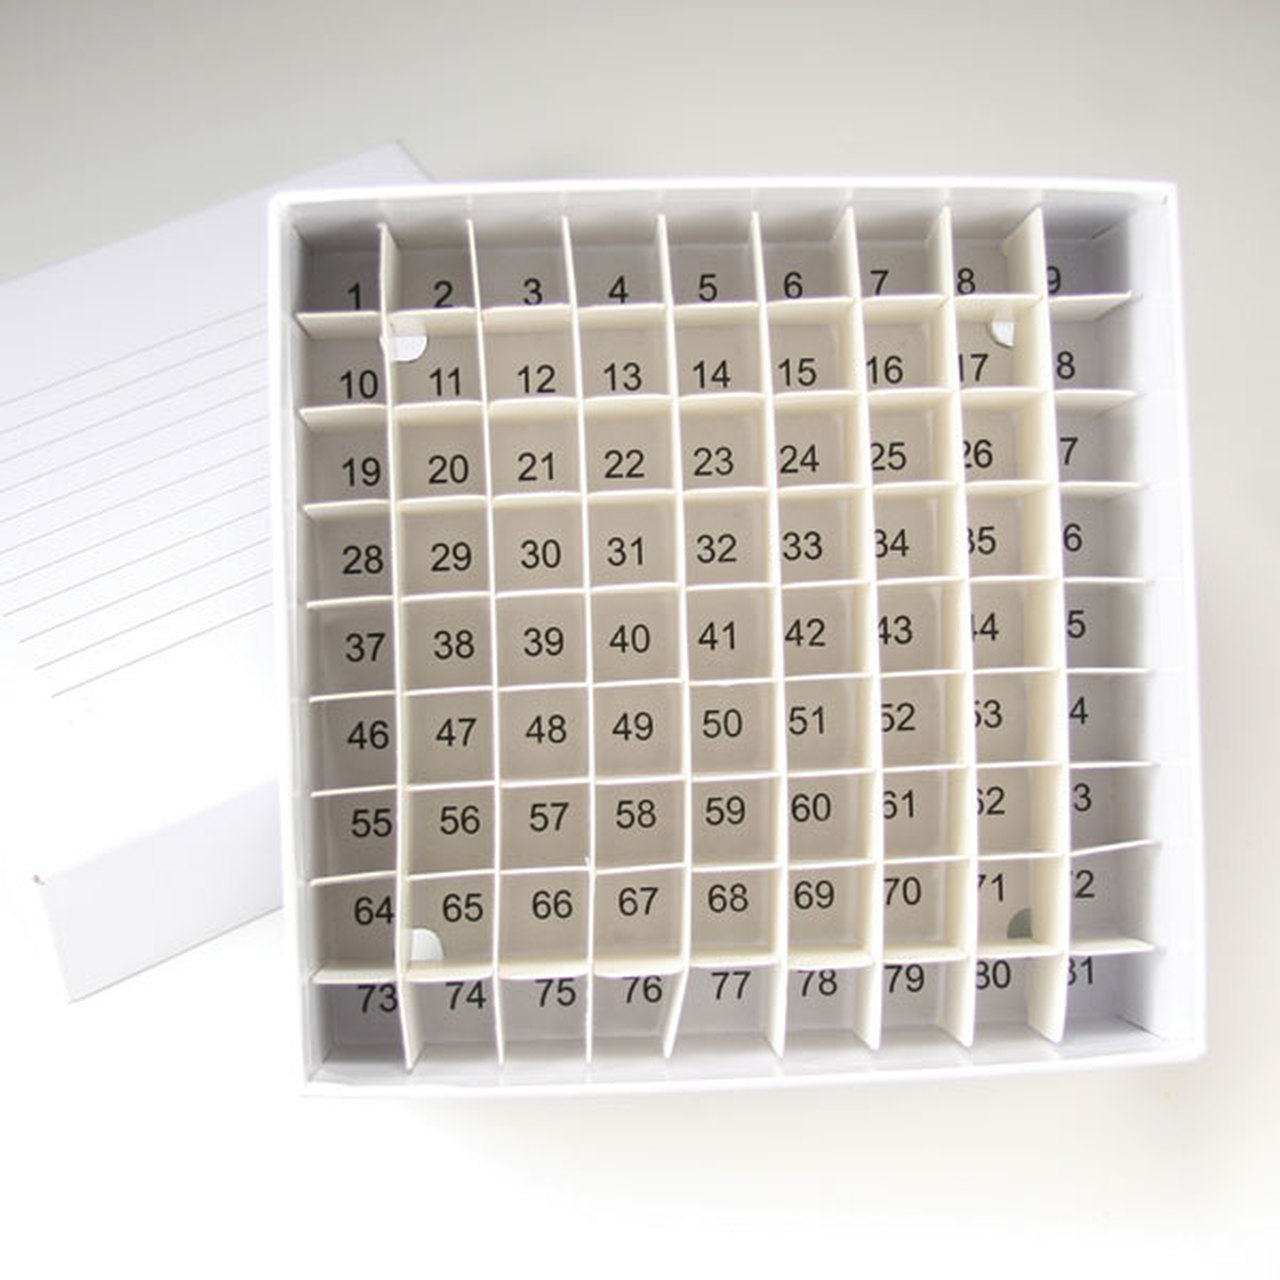 https://www.stellarscientific.com/product_images/uploaded_images/stellar-scientific-cardboard-freezer-boxes-come-with-dividers-and-a-numbered-grid-for-keeping-track-of-samples-lab-freezer-supplies.jpg